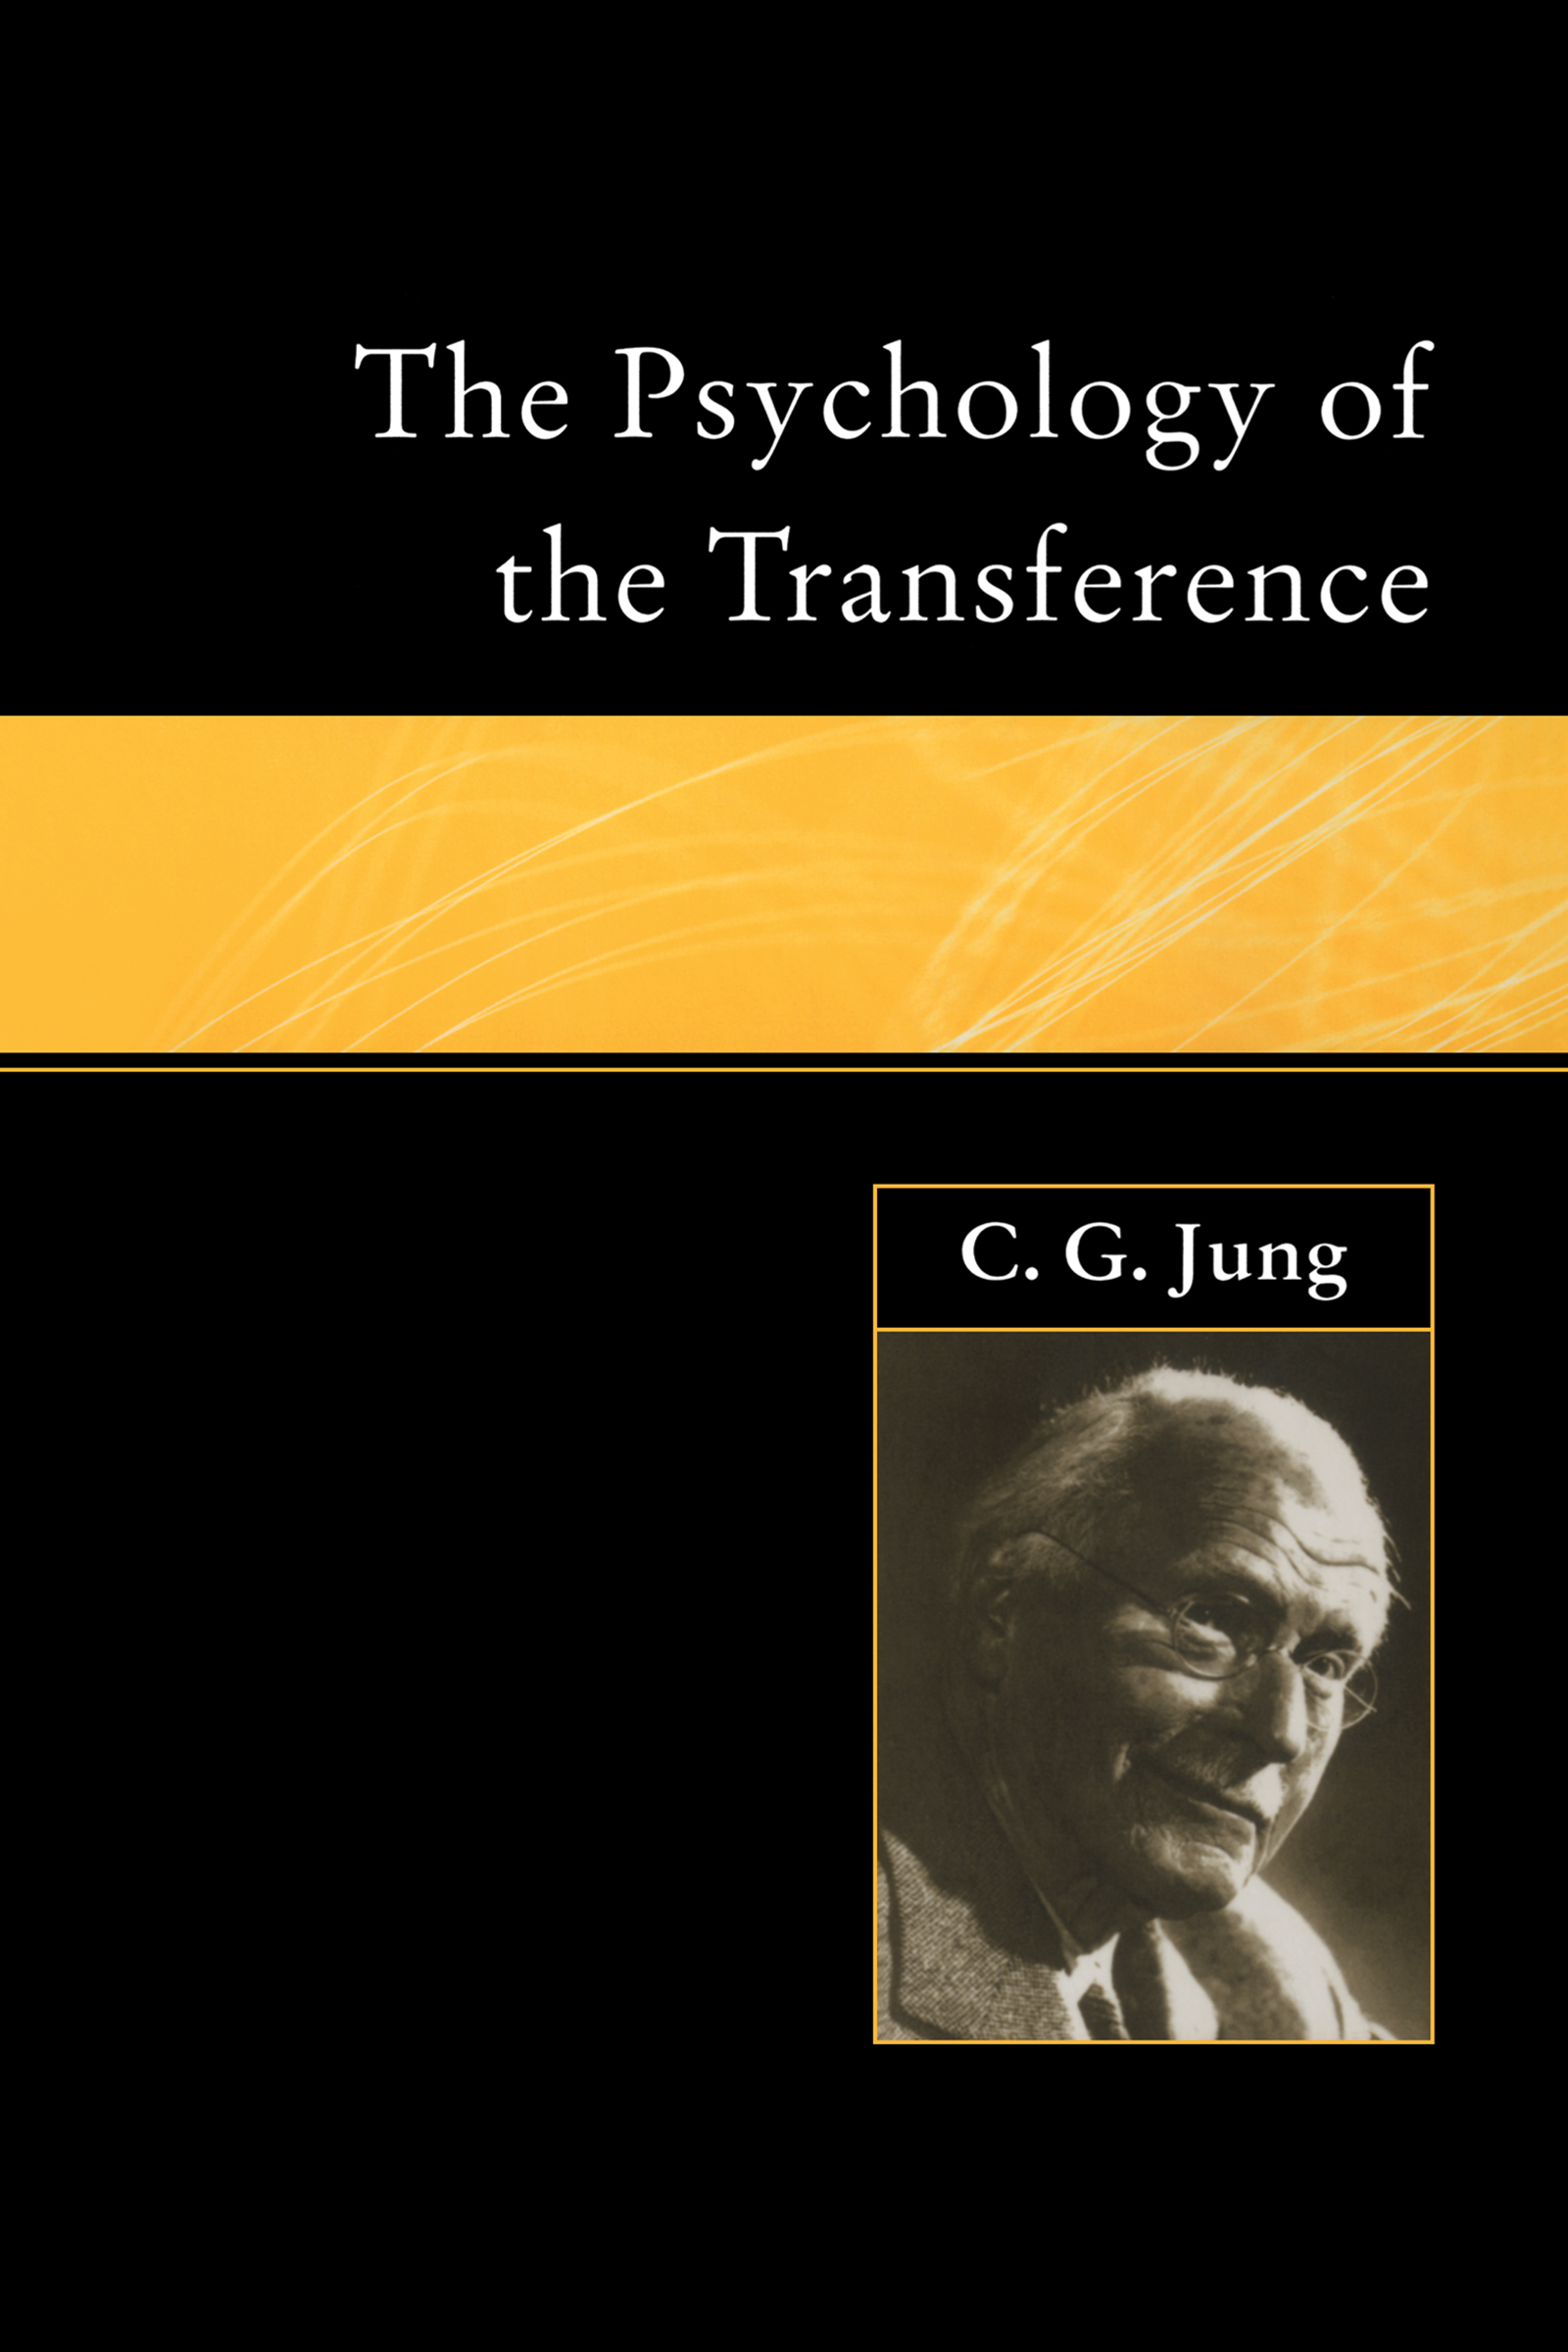 The Psychology of the Transference - 15-24.99